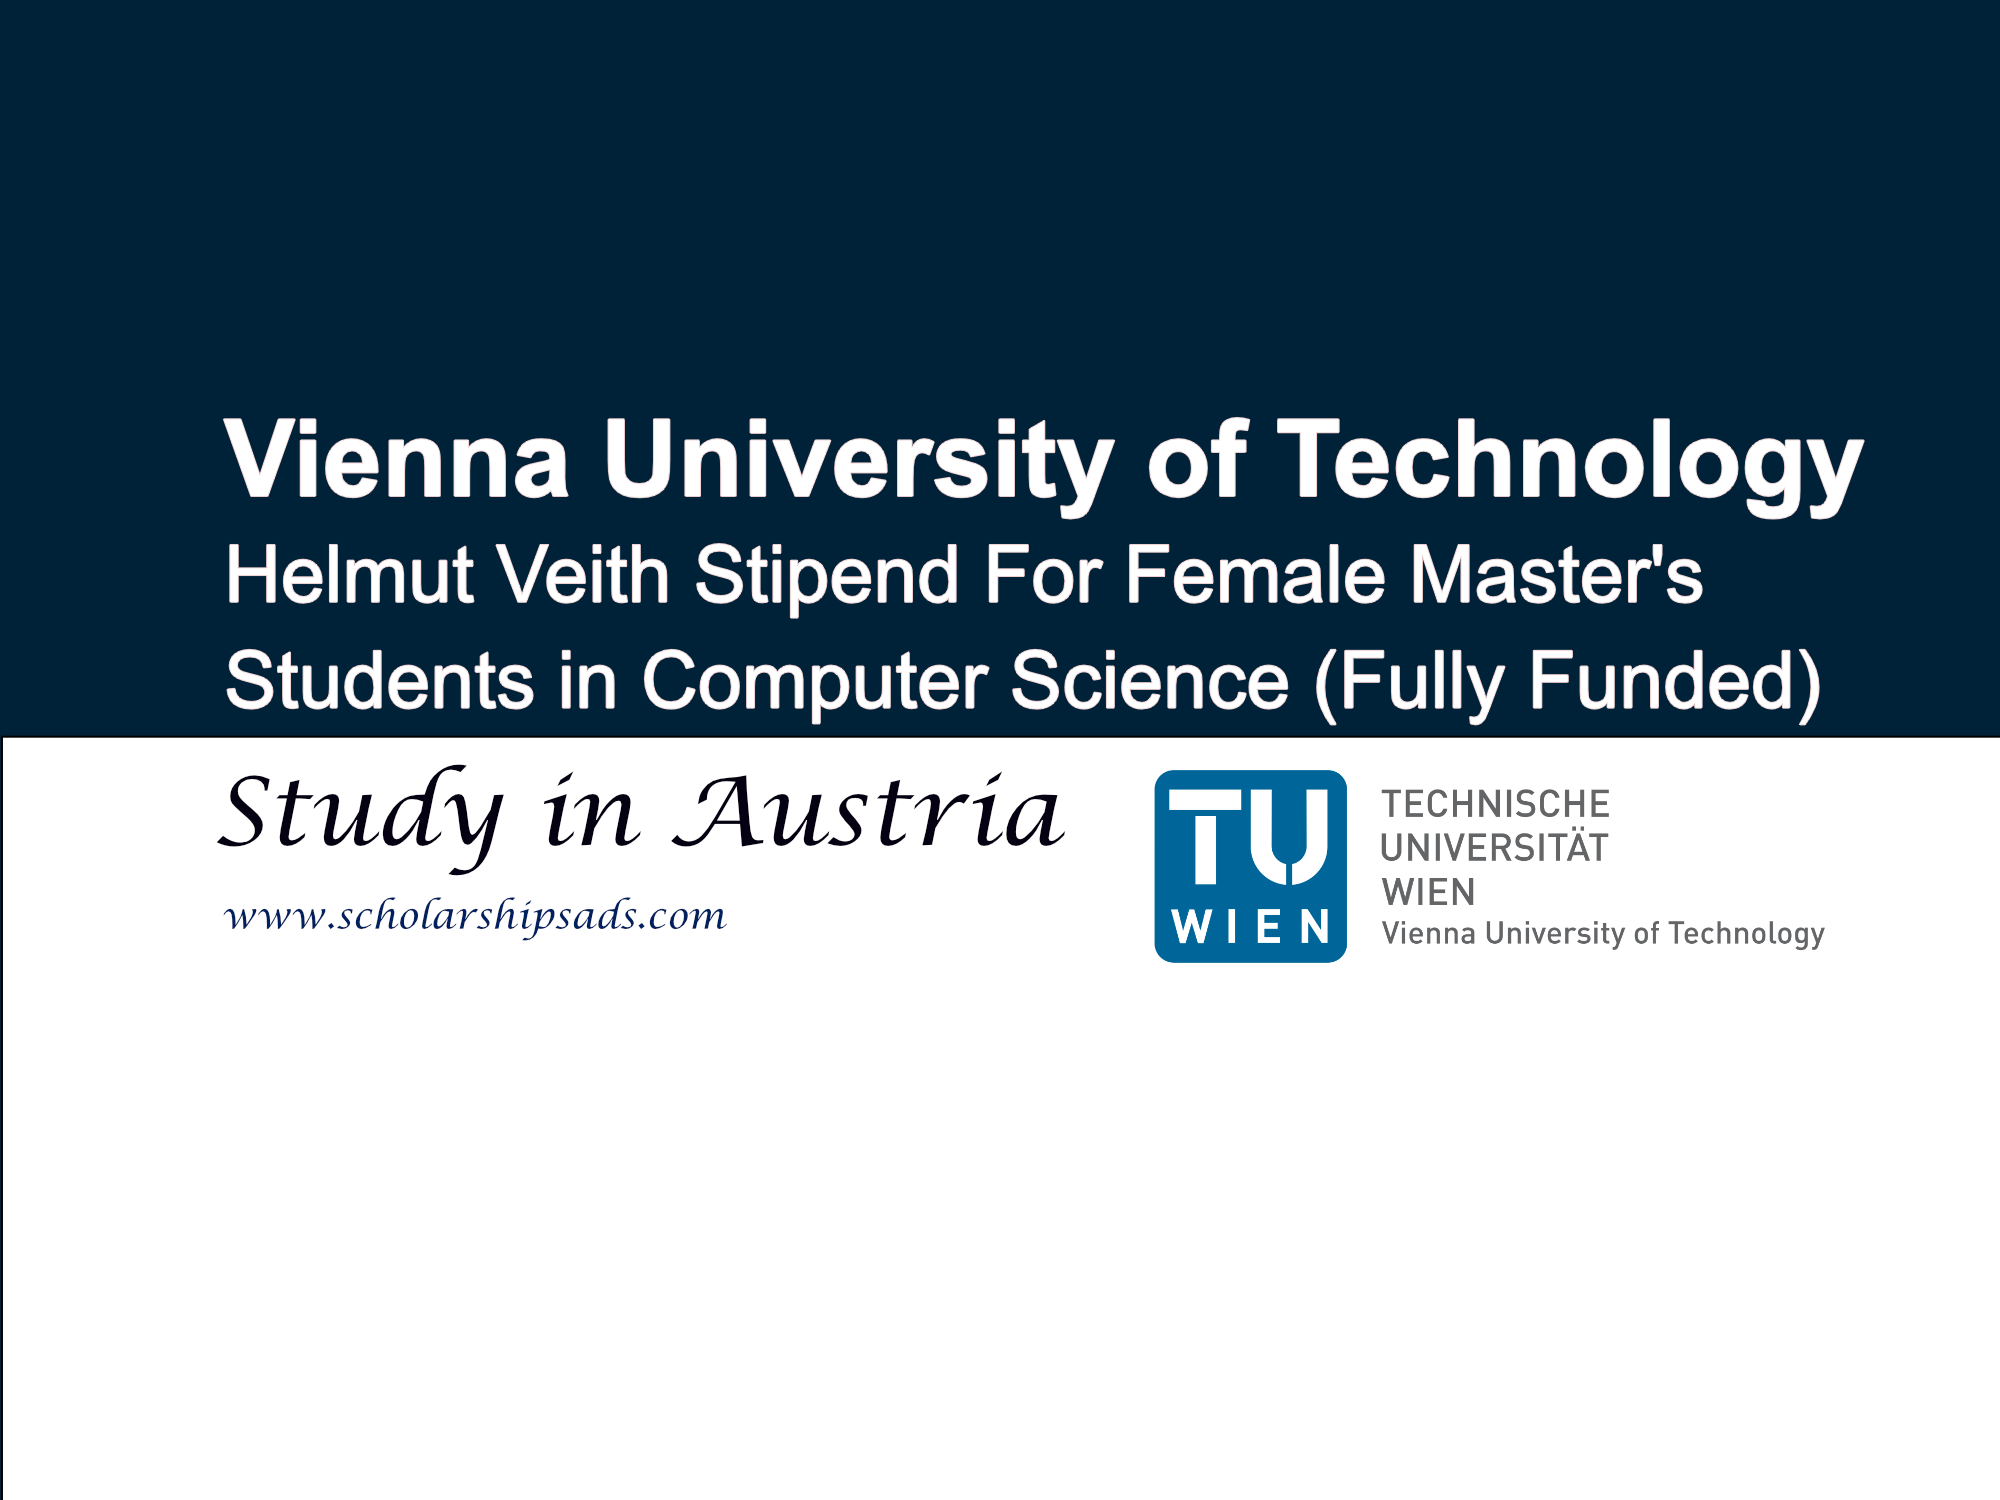 Helmut Veith Stipend For Female Master's Students in Computer Science 2024-25.(Fully Funded)